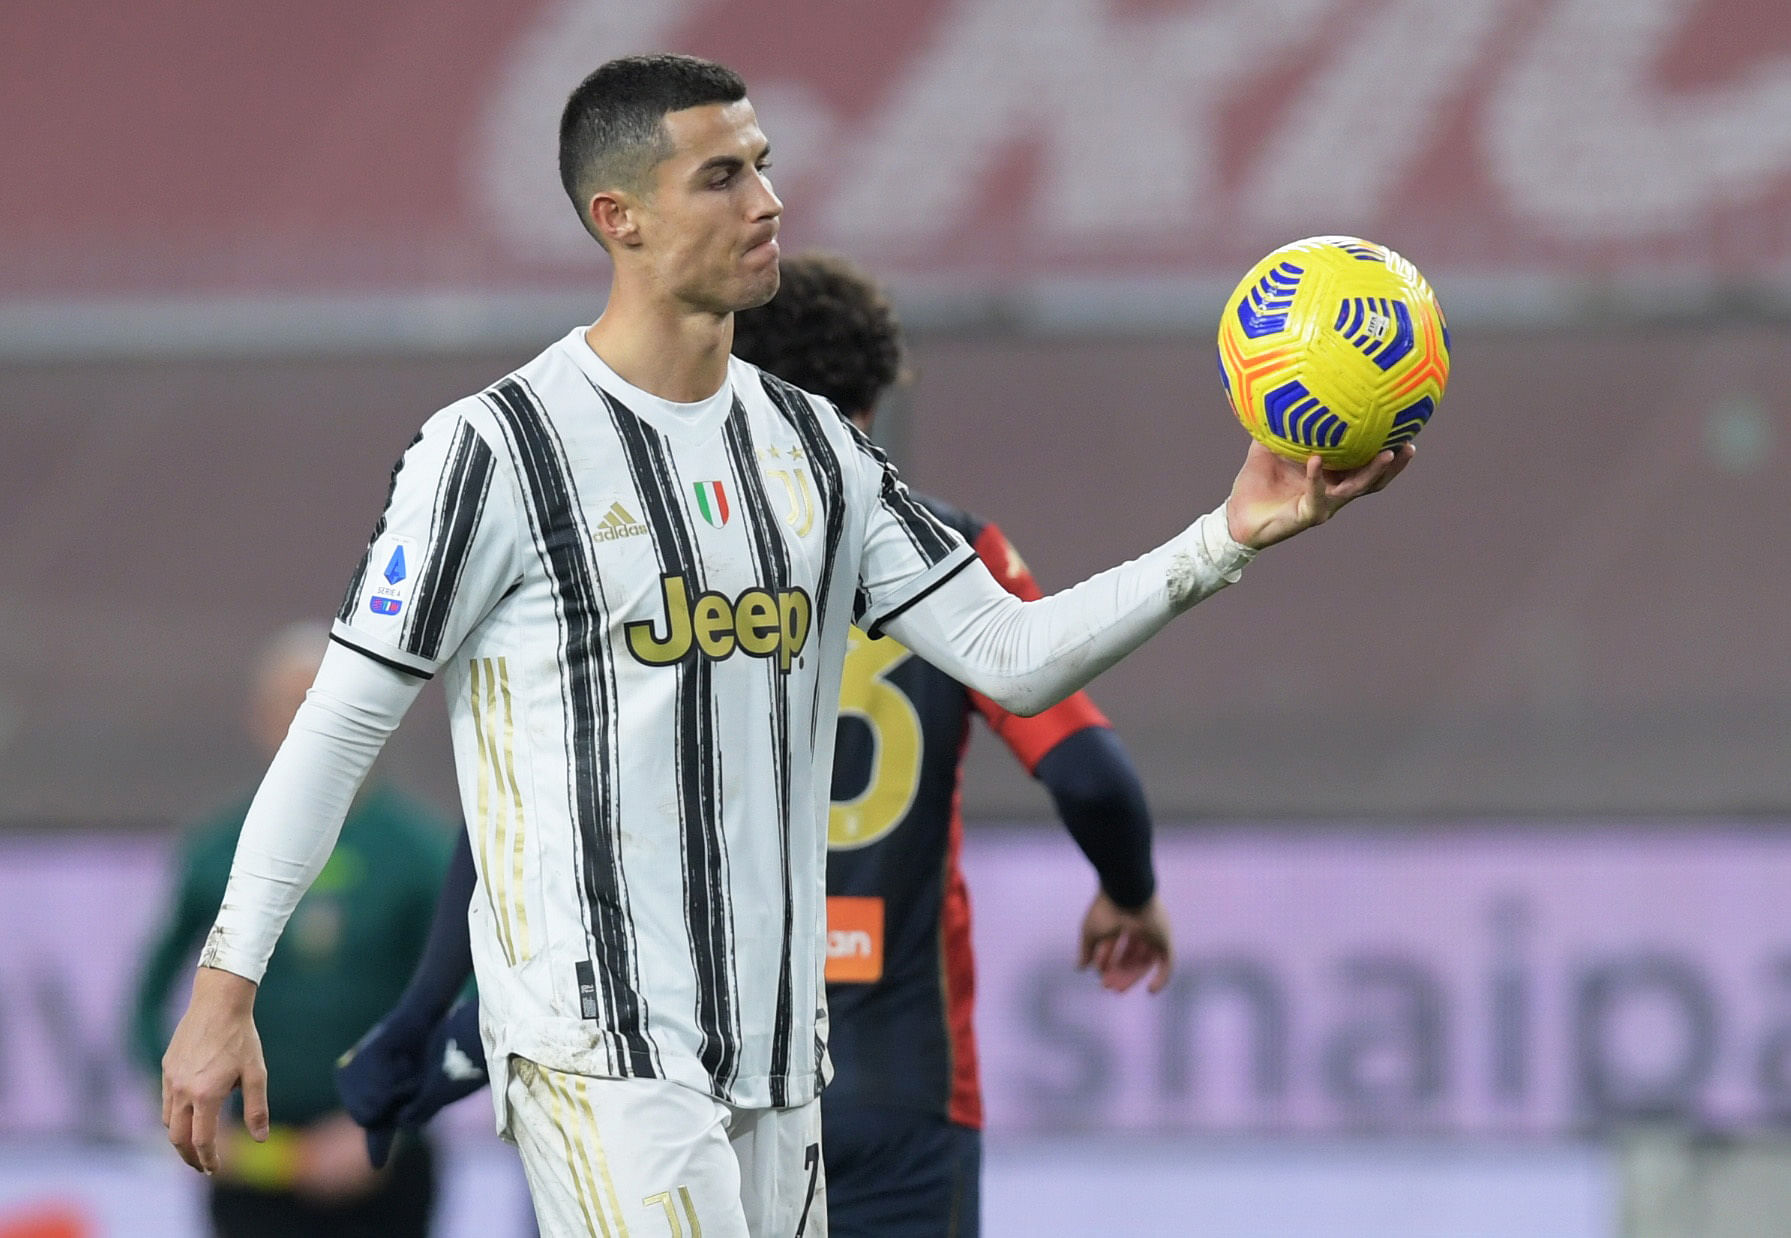 2020 Juventus' Cristiano Ronaldo holding the ball after the match. Credit: REUTERS